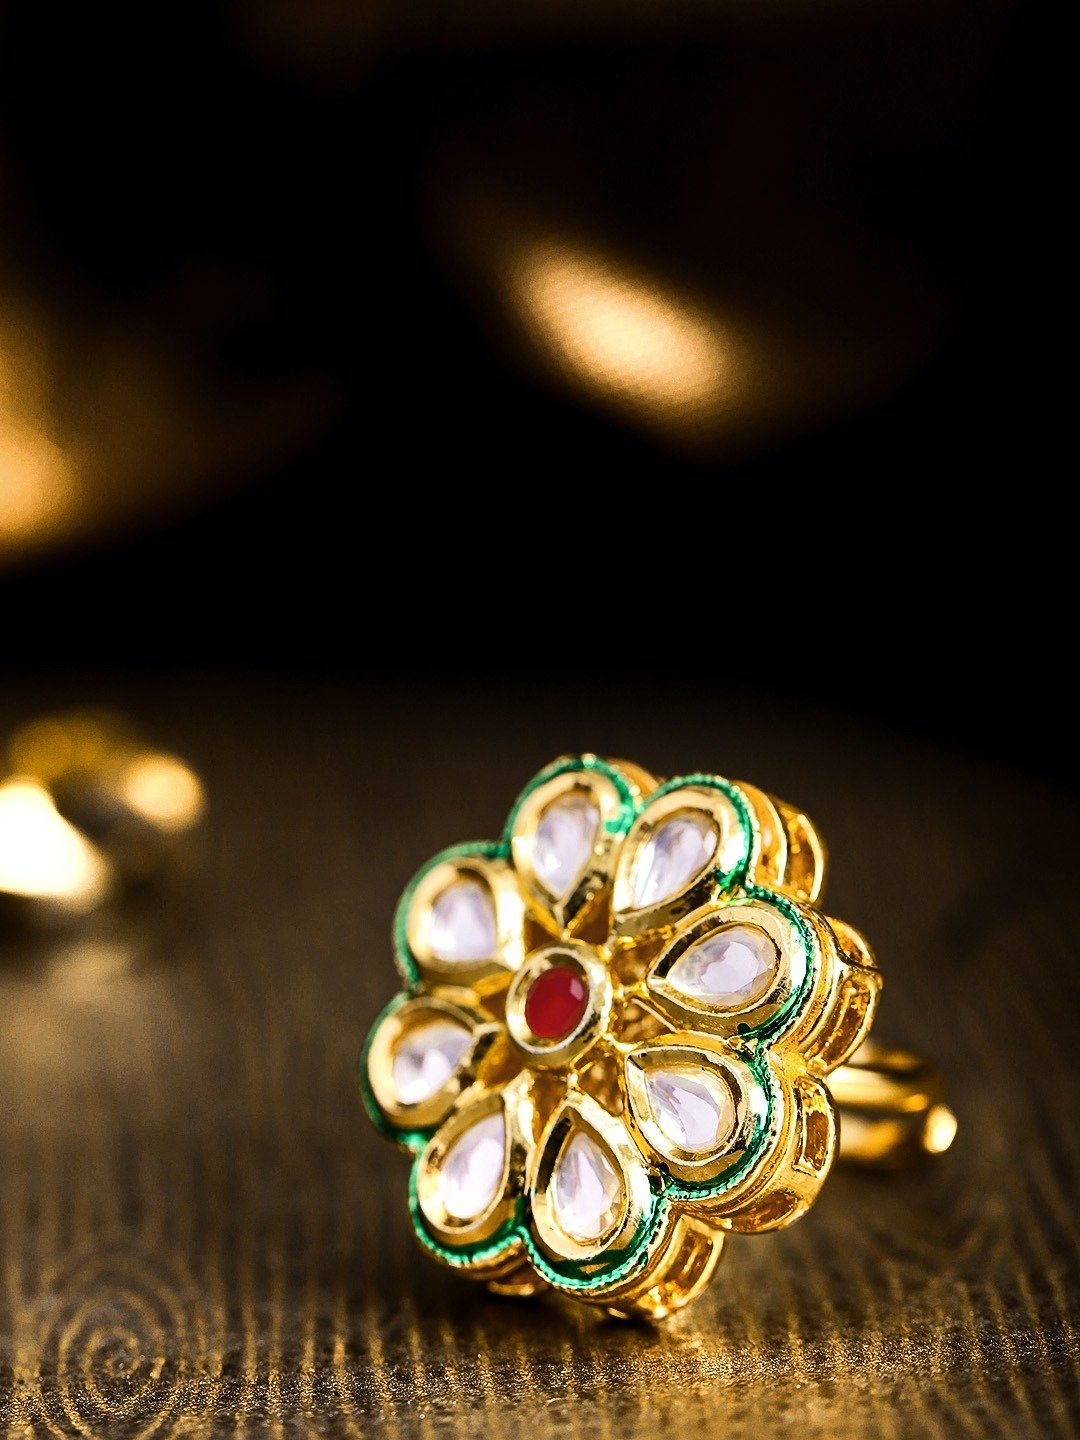 Women's Gold-Plated Kundan & Ruby Studded Adjustable Ring in Floral Pattern - Priyaasi